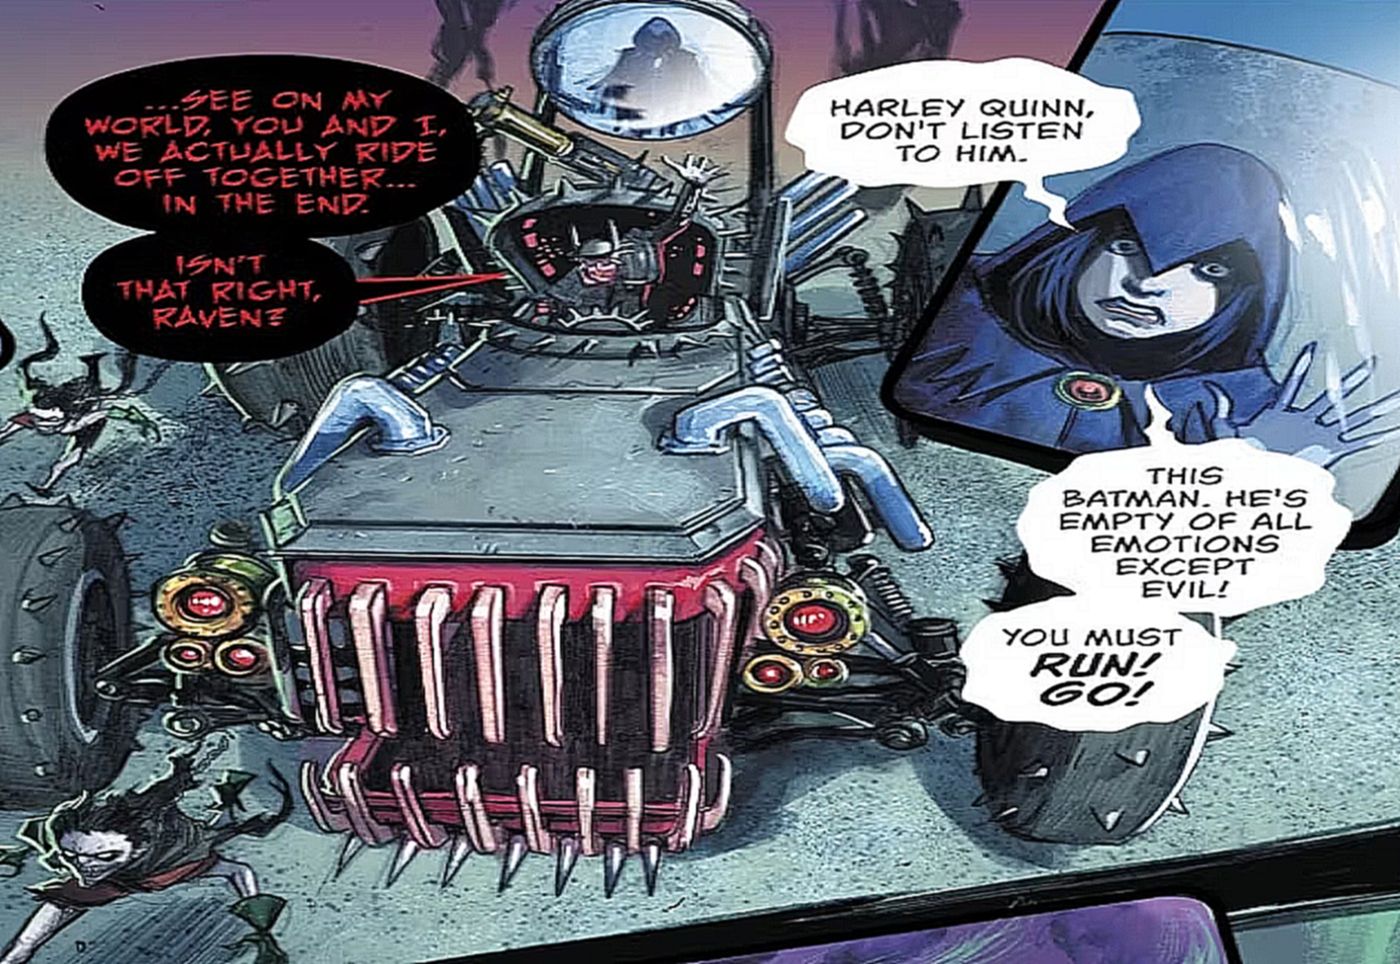 The Batman Who Laughs shows off his horrifying version of the Batmobile